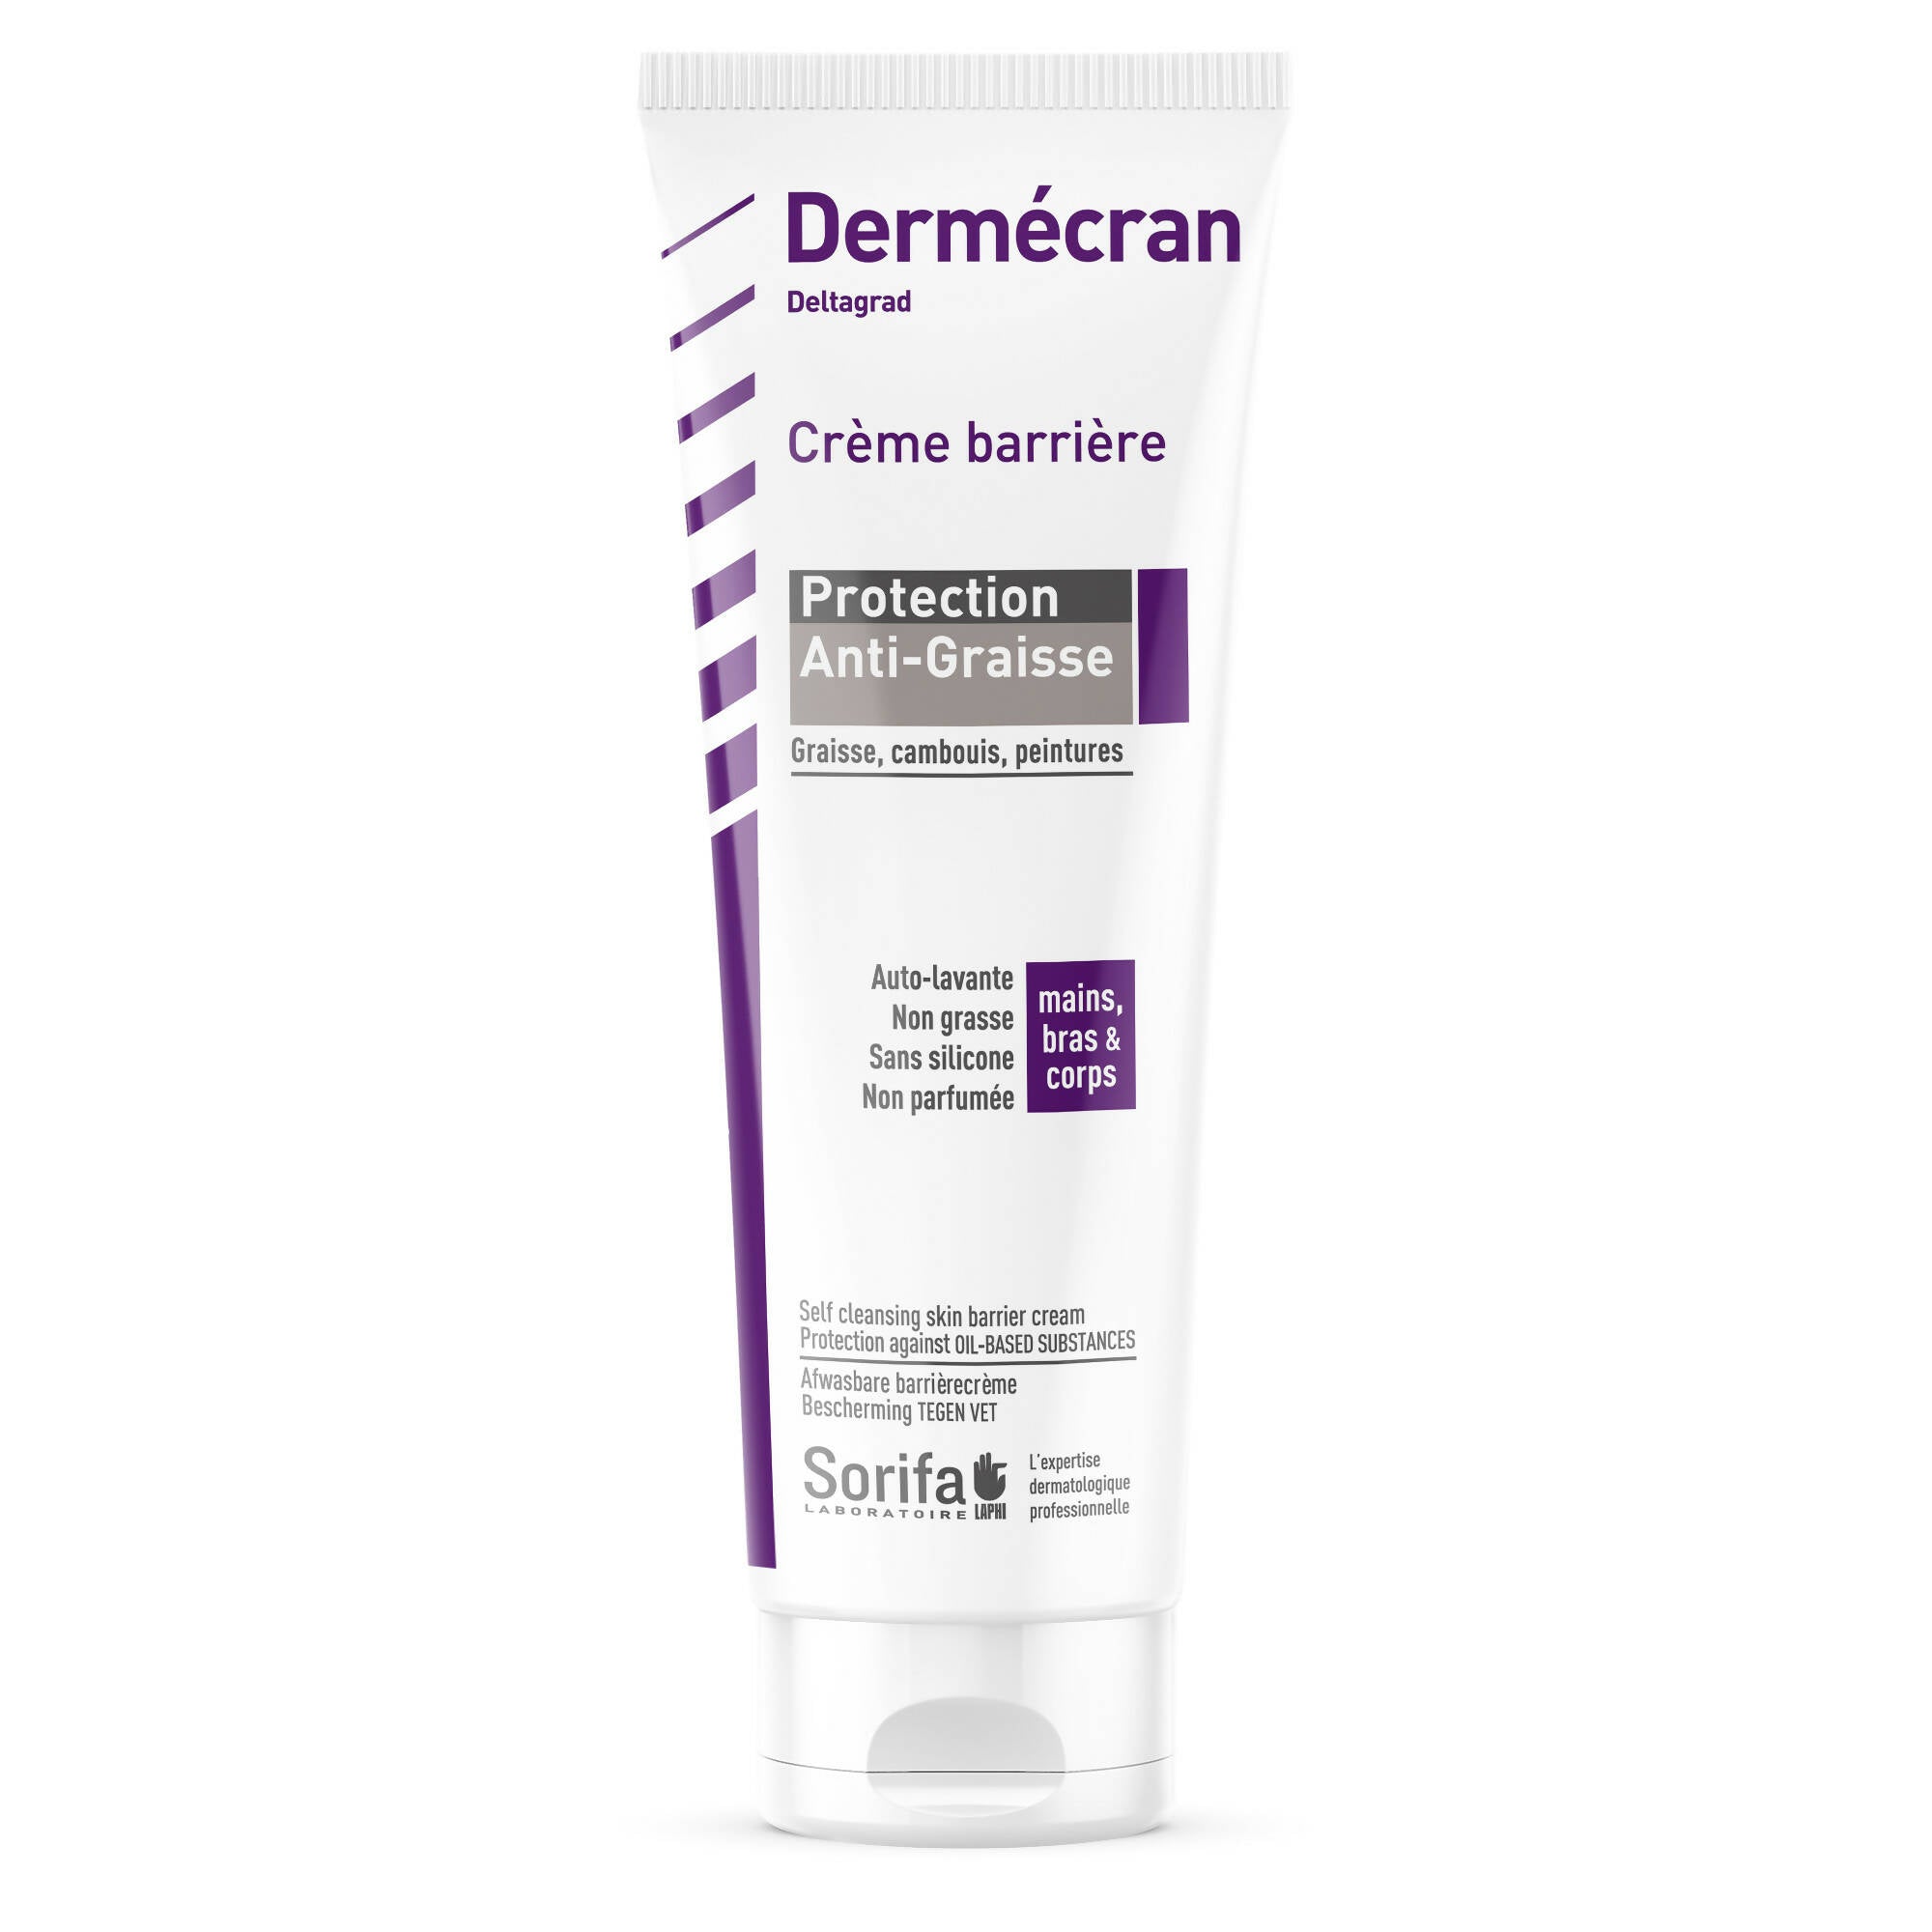 SORIFA - Set of 3 - Dermscreen - Barrier Cream - ANTI-GREASE Protection / Deltagrad - Hands, arms and body - High tolerance - Fragrance-free - 125 ml tube. - 0